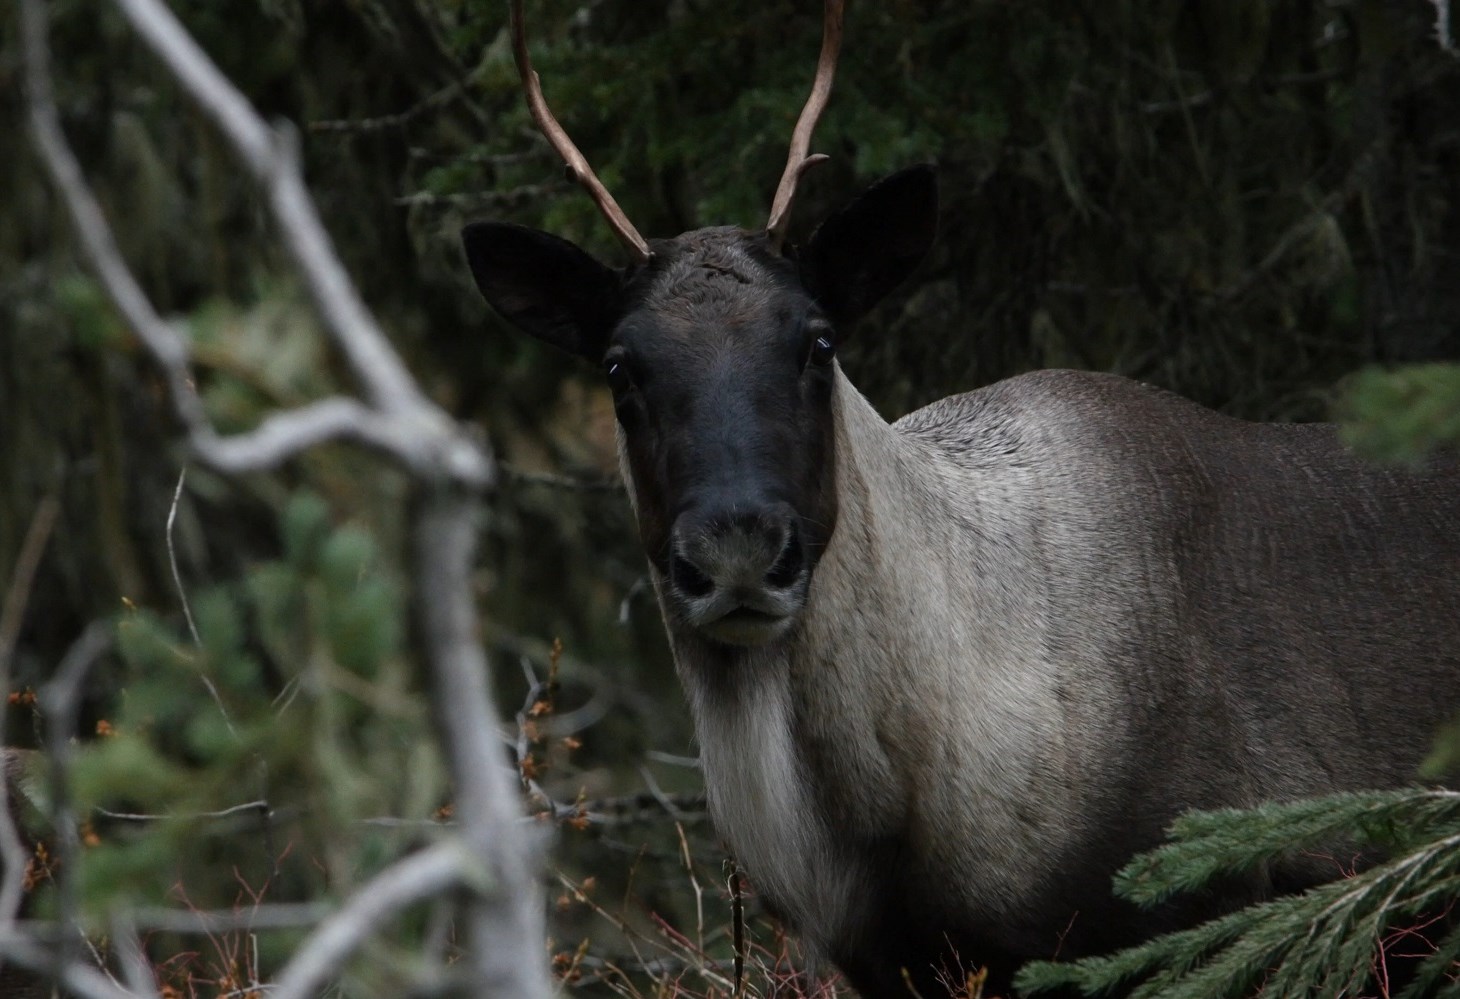 Can Southern Mountain Caribou Recover?  See This Film.